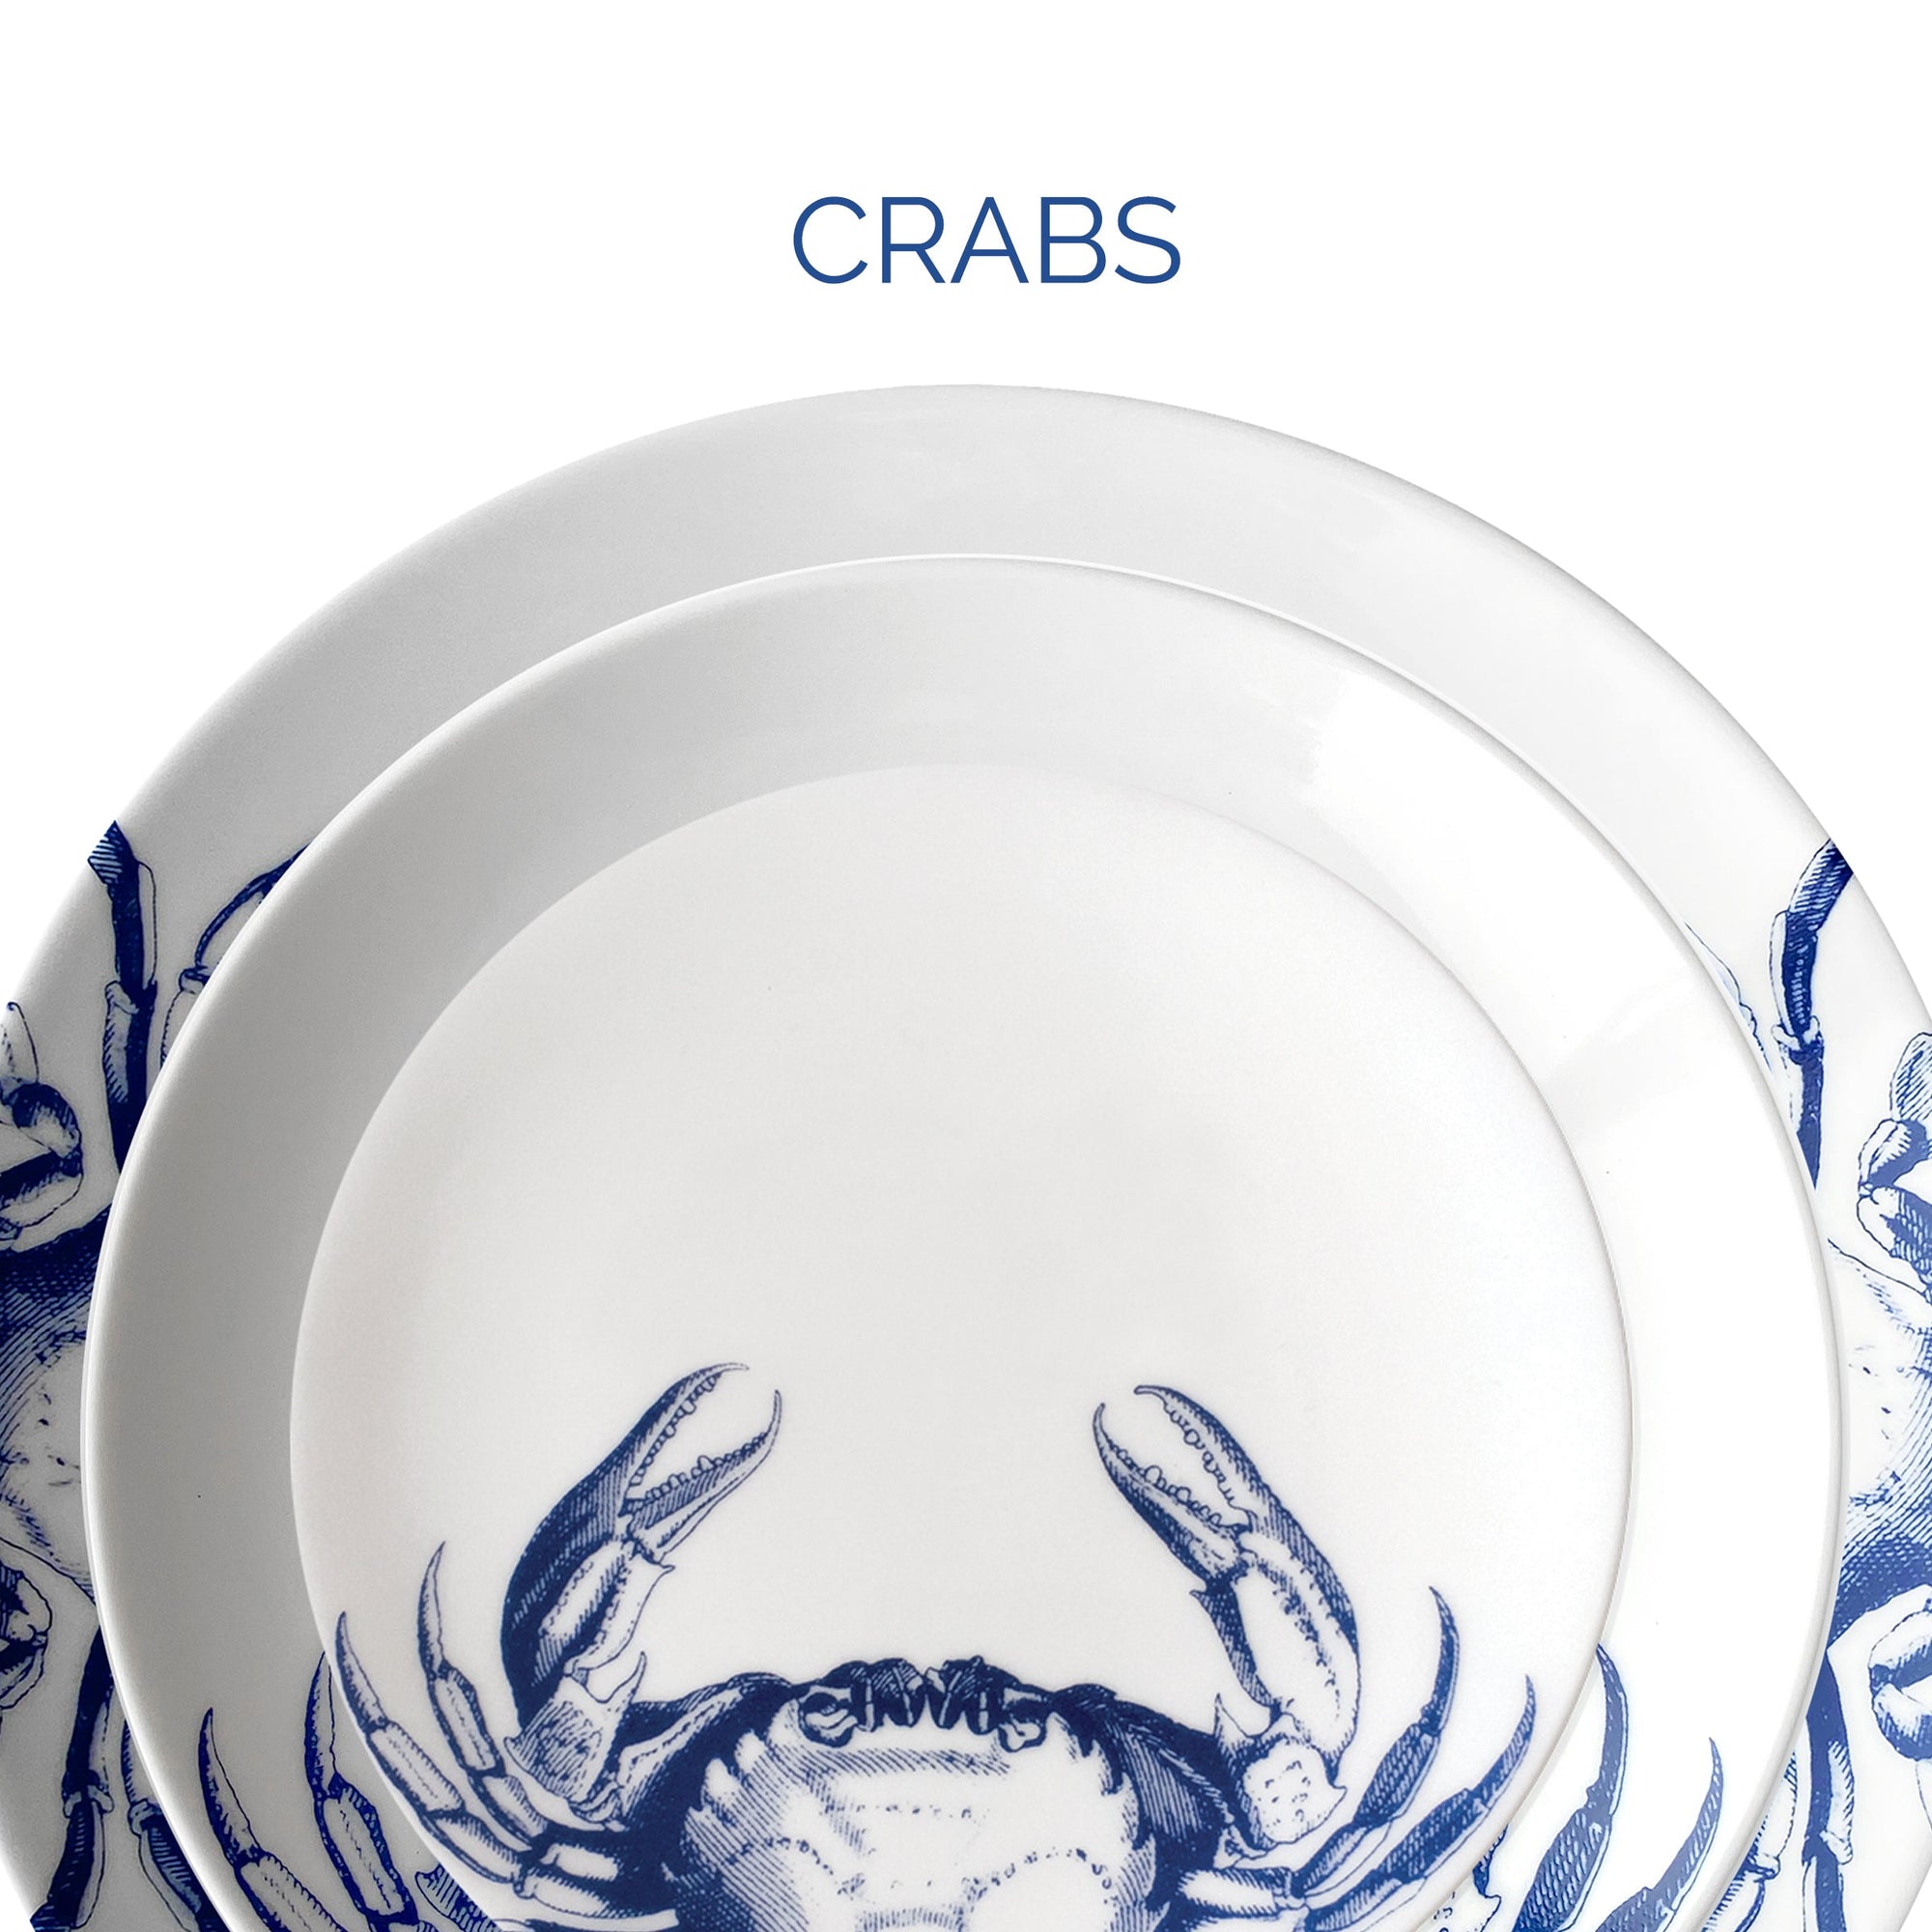 White plate with blue crab designs on the rim and the word "crabs" at the top.